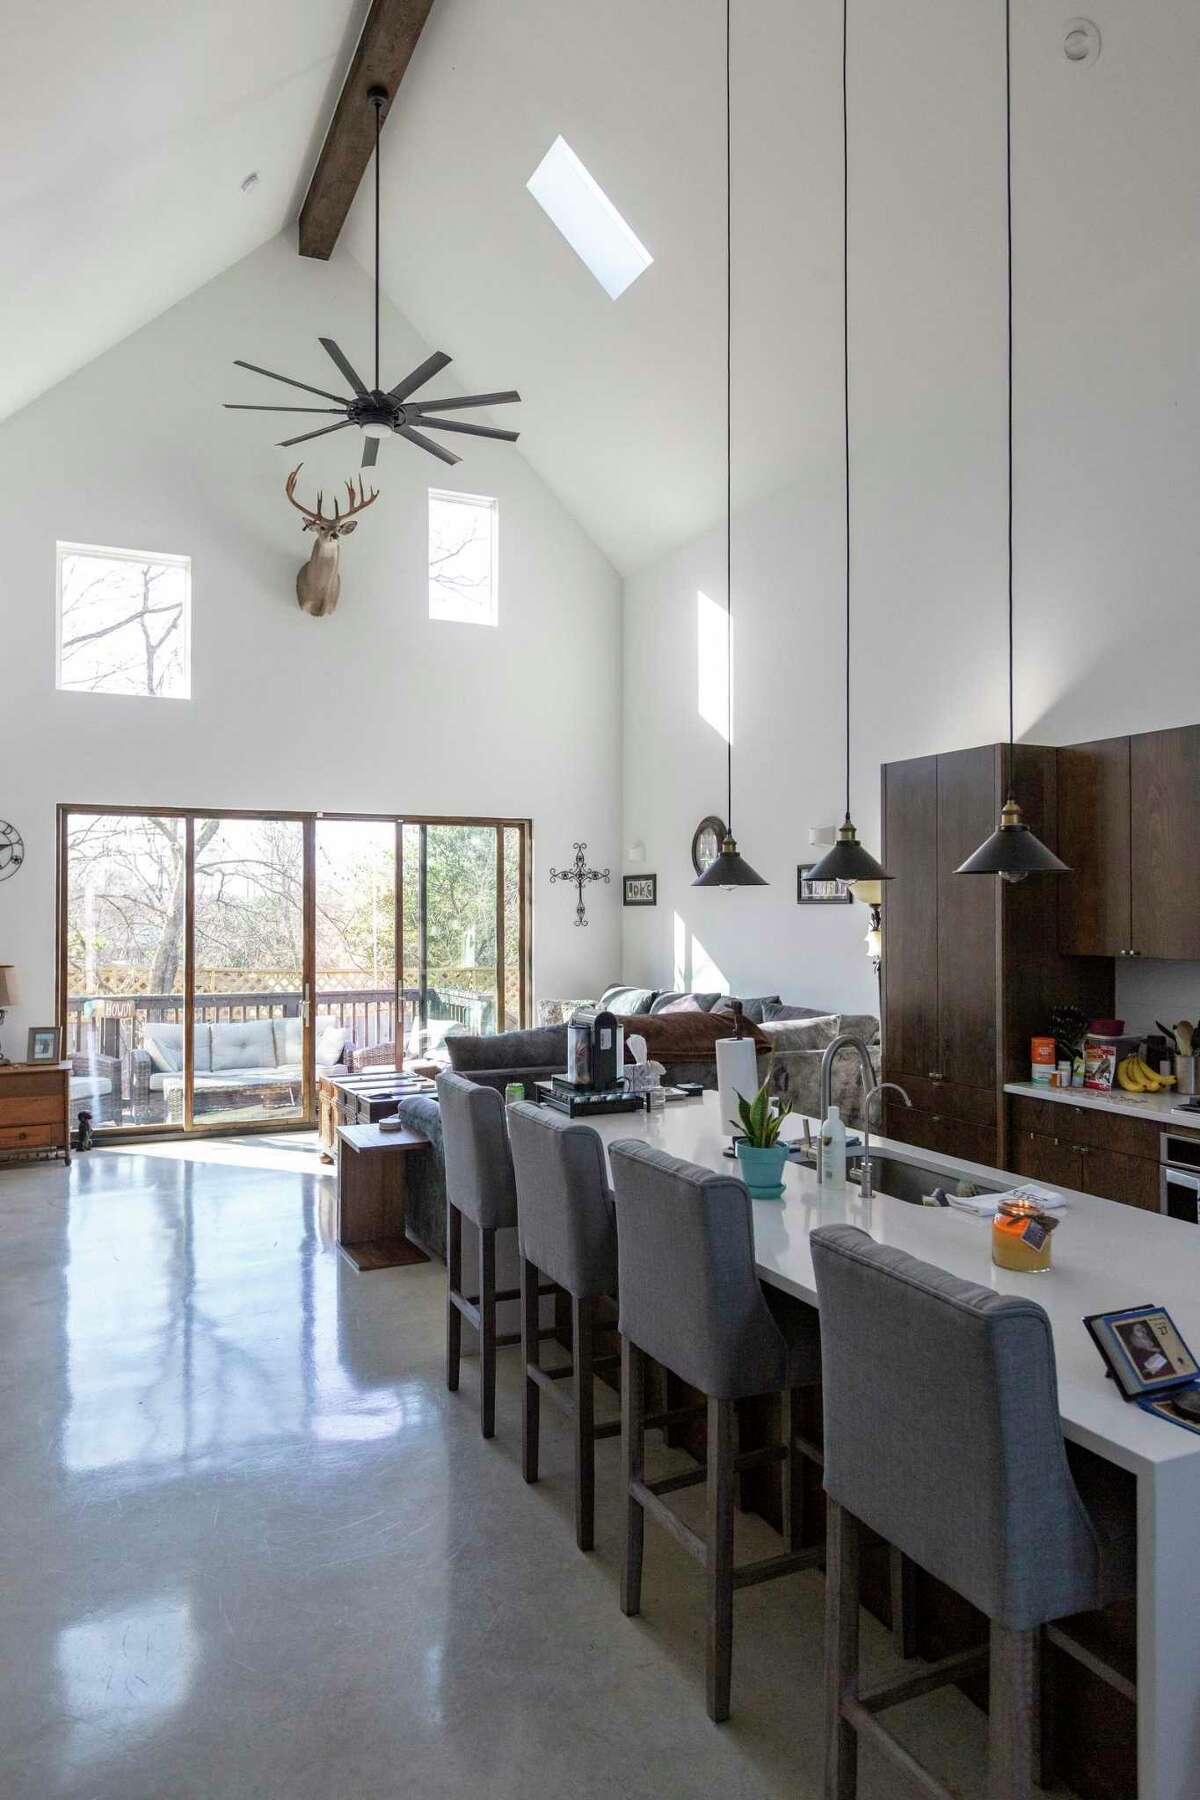 The living and kitchen areas of Jeanna Easley’s Alamo Heights home. It includes energy efficient features such as blown-in foam insulation and a tankless smart hot water heater.